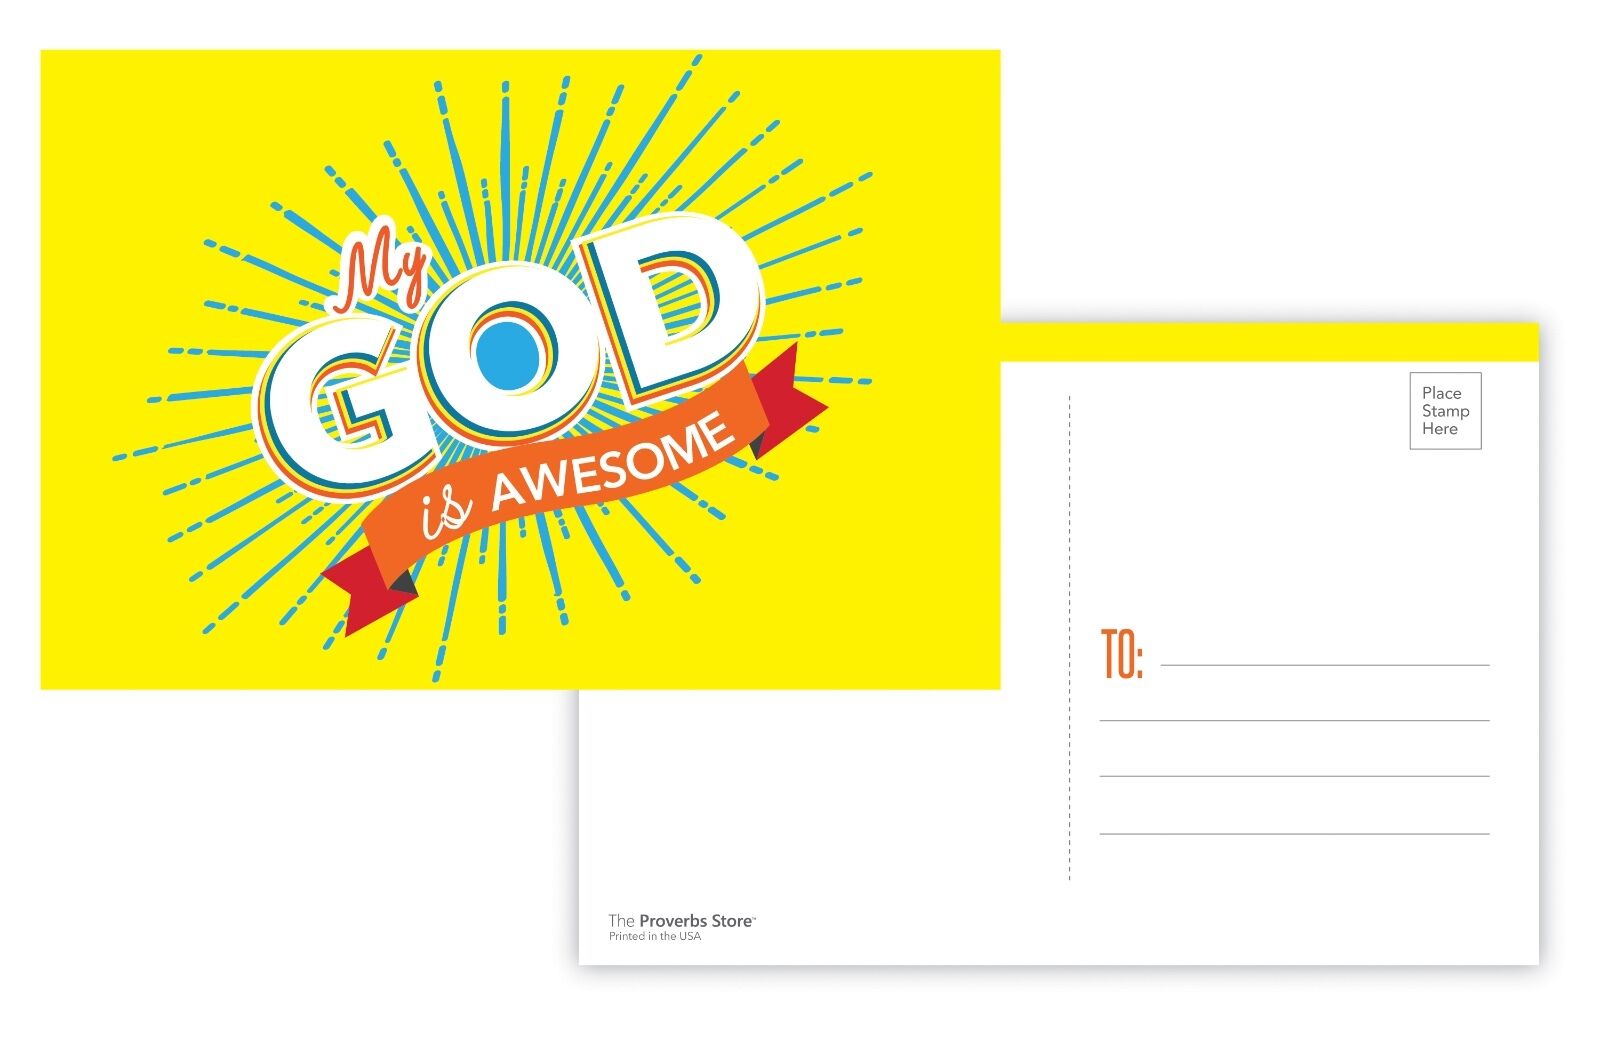 My God Is Awesome Christian Religious Bible POSTCARDS (30 Pack) Motivational